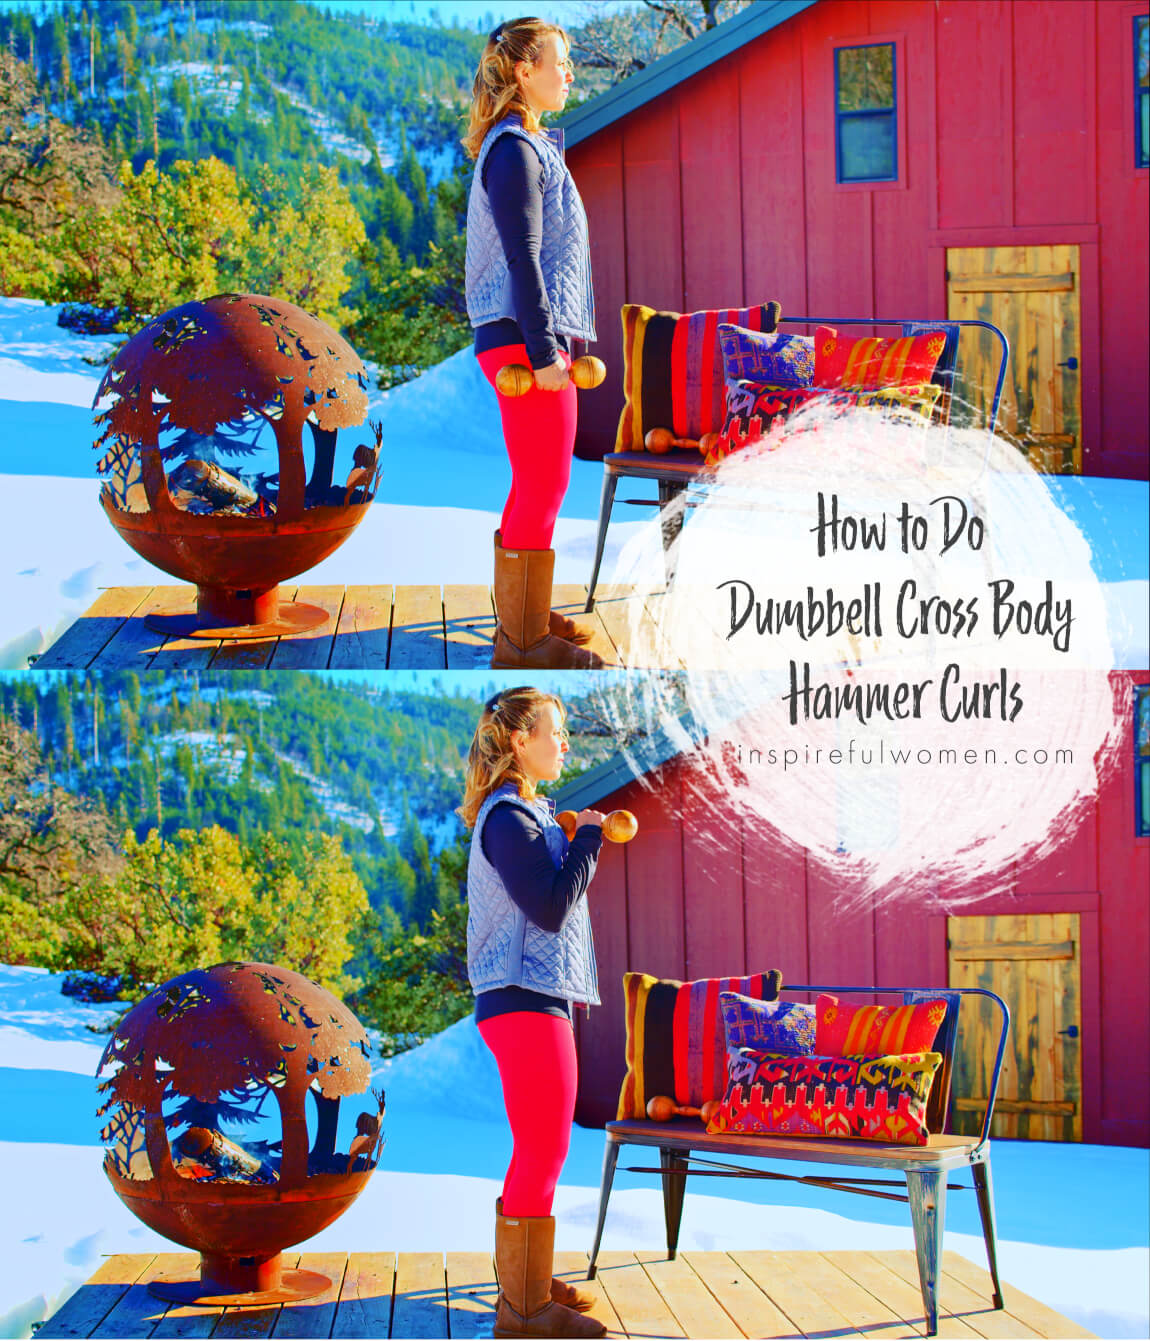 how-to-do-crossbody-dumbbell-hammer-curls-bicep-strength-training-at-home-women-40-above